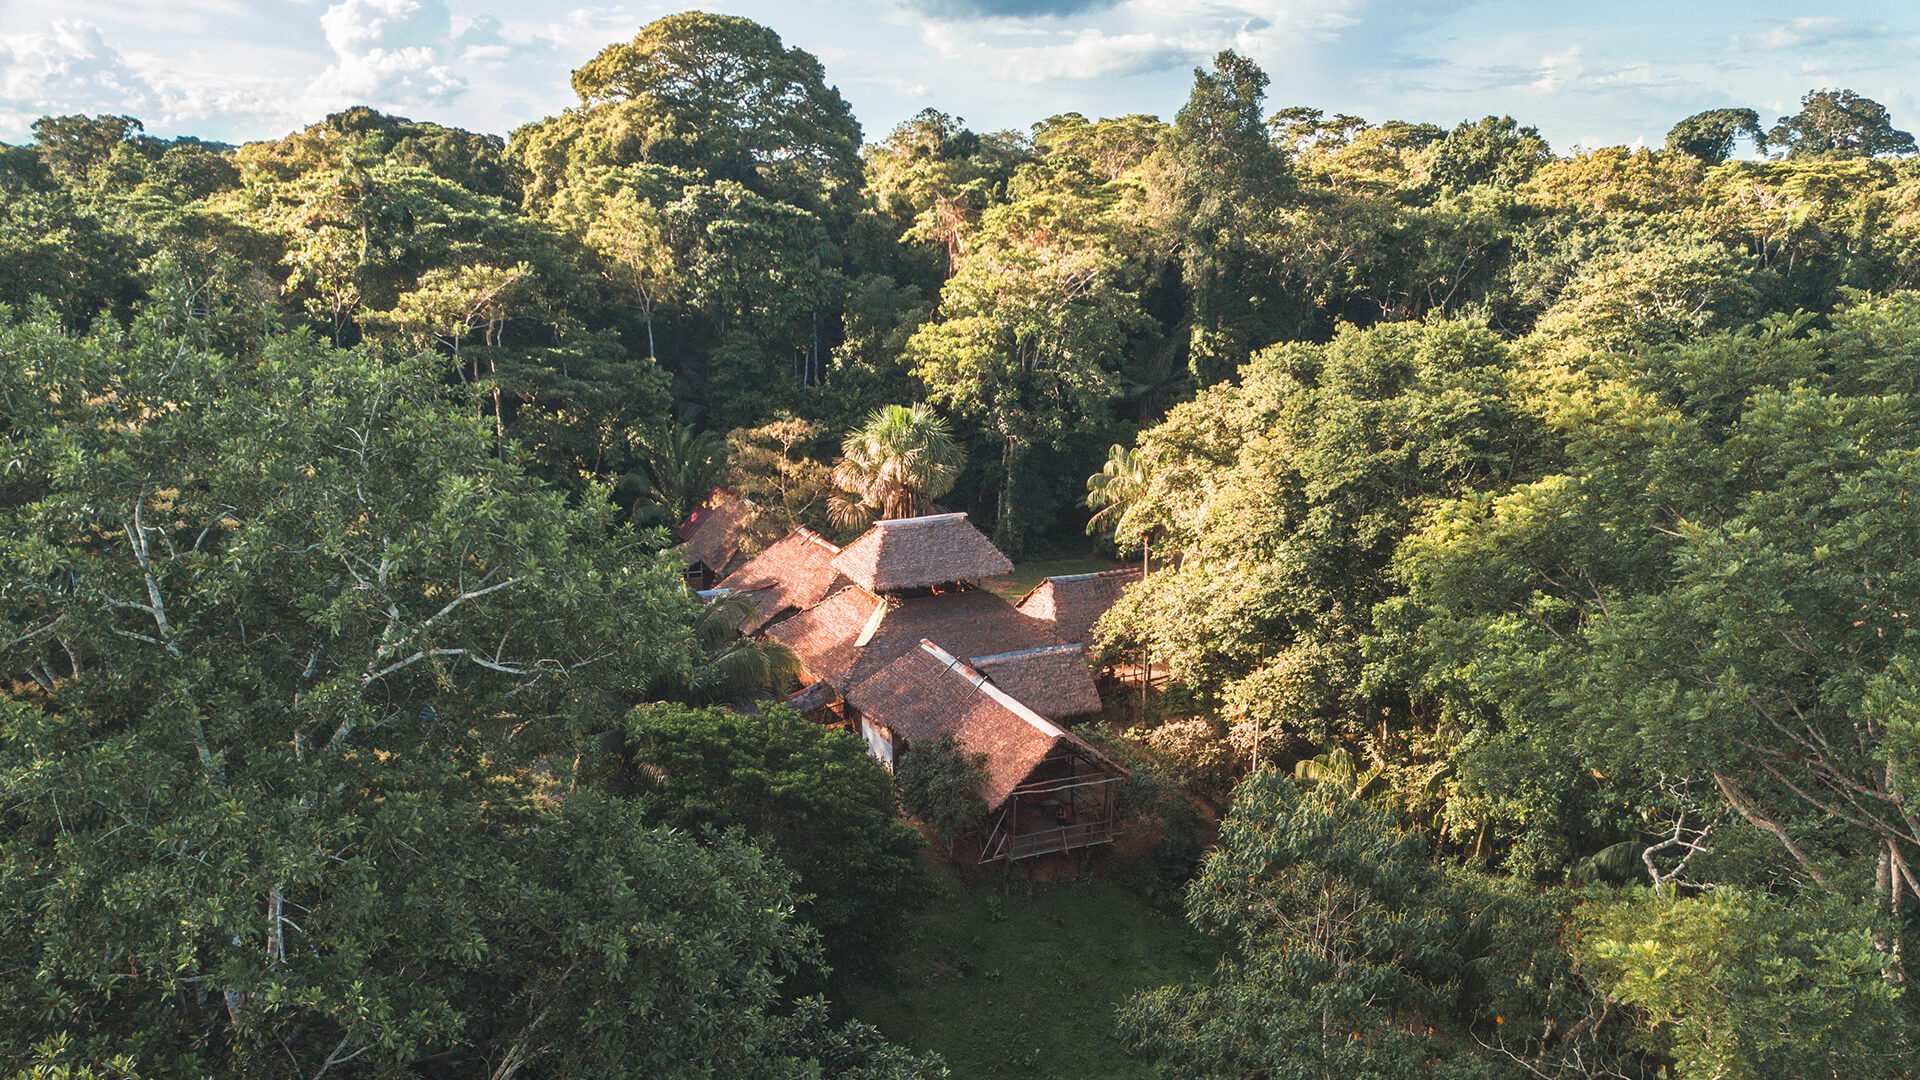 Aerial view of the Lodge in the middle of the jungle